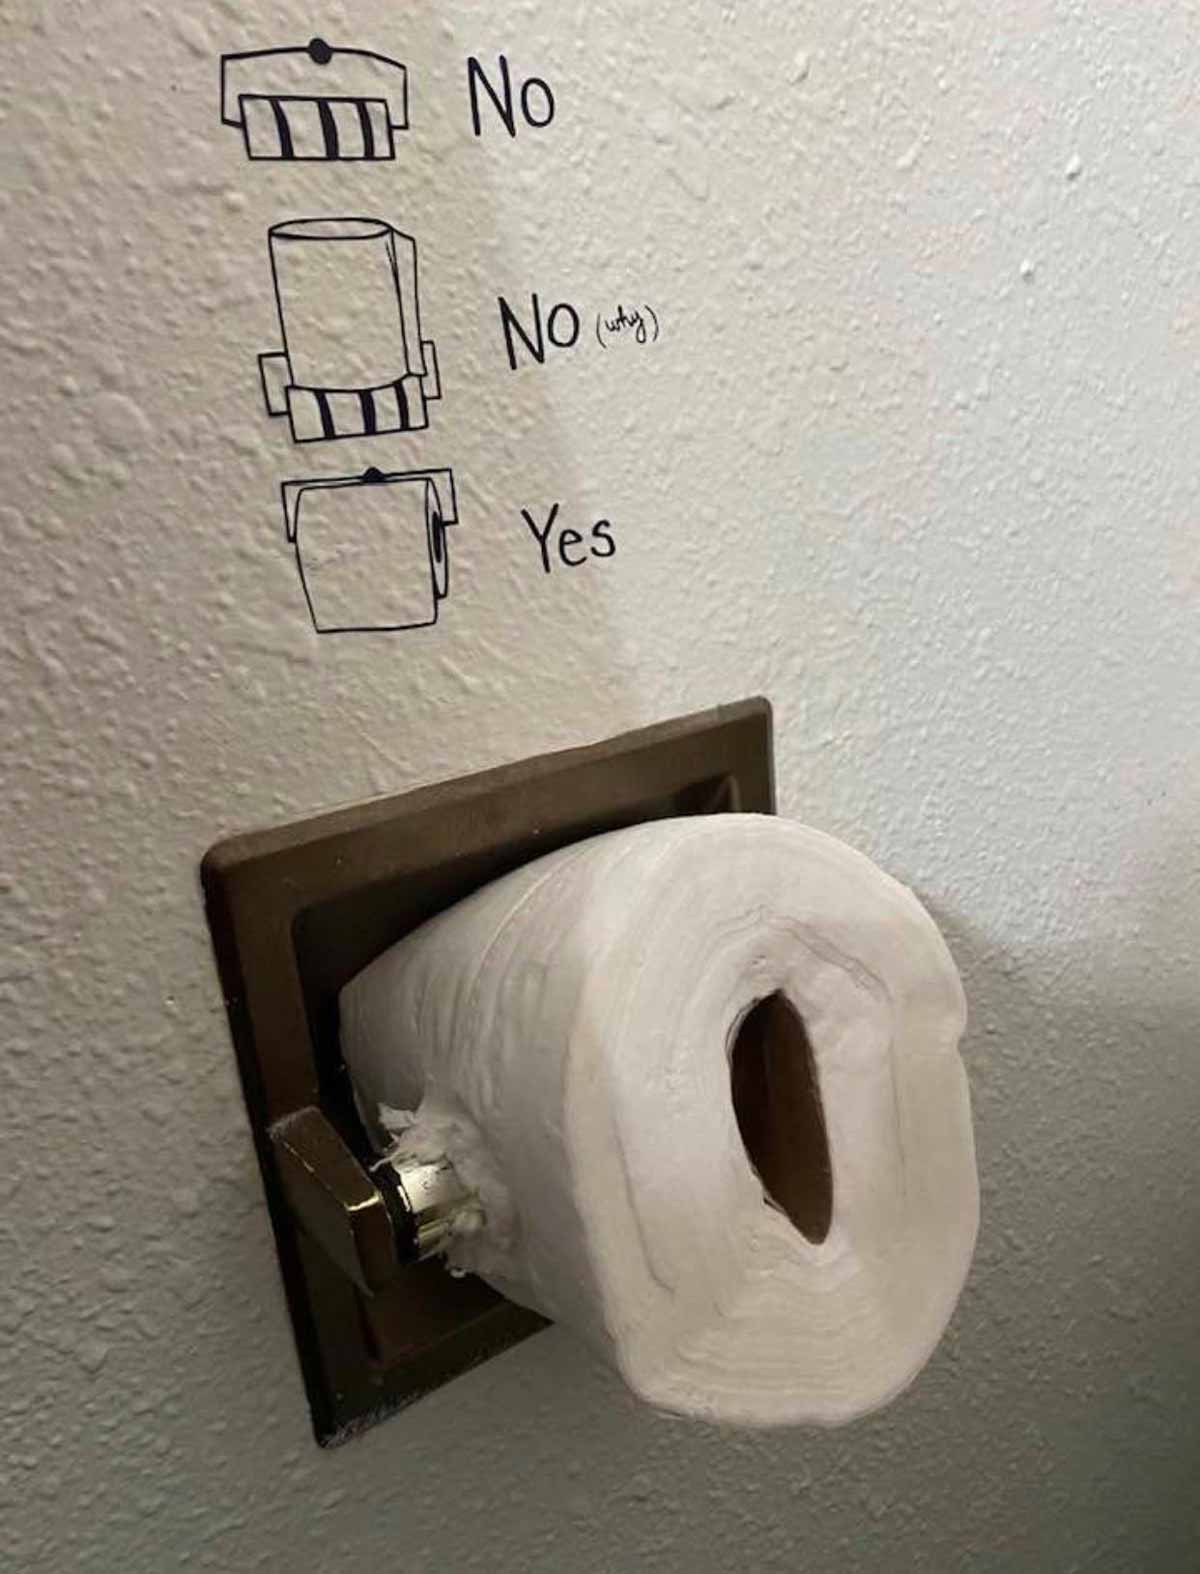 Funny picture of two drawings of how not to put toilet paper on the holder and one with the proper way and below the drawings in the actual toilet paper roll where someone drilled a hole and put the paper on in a way that it's unusable.